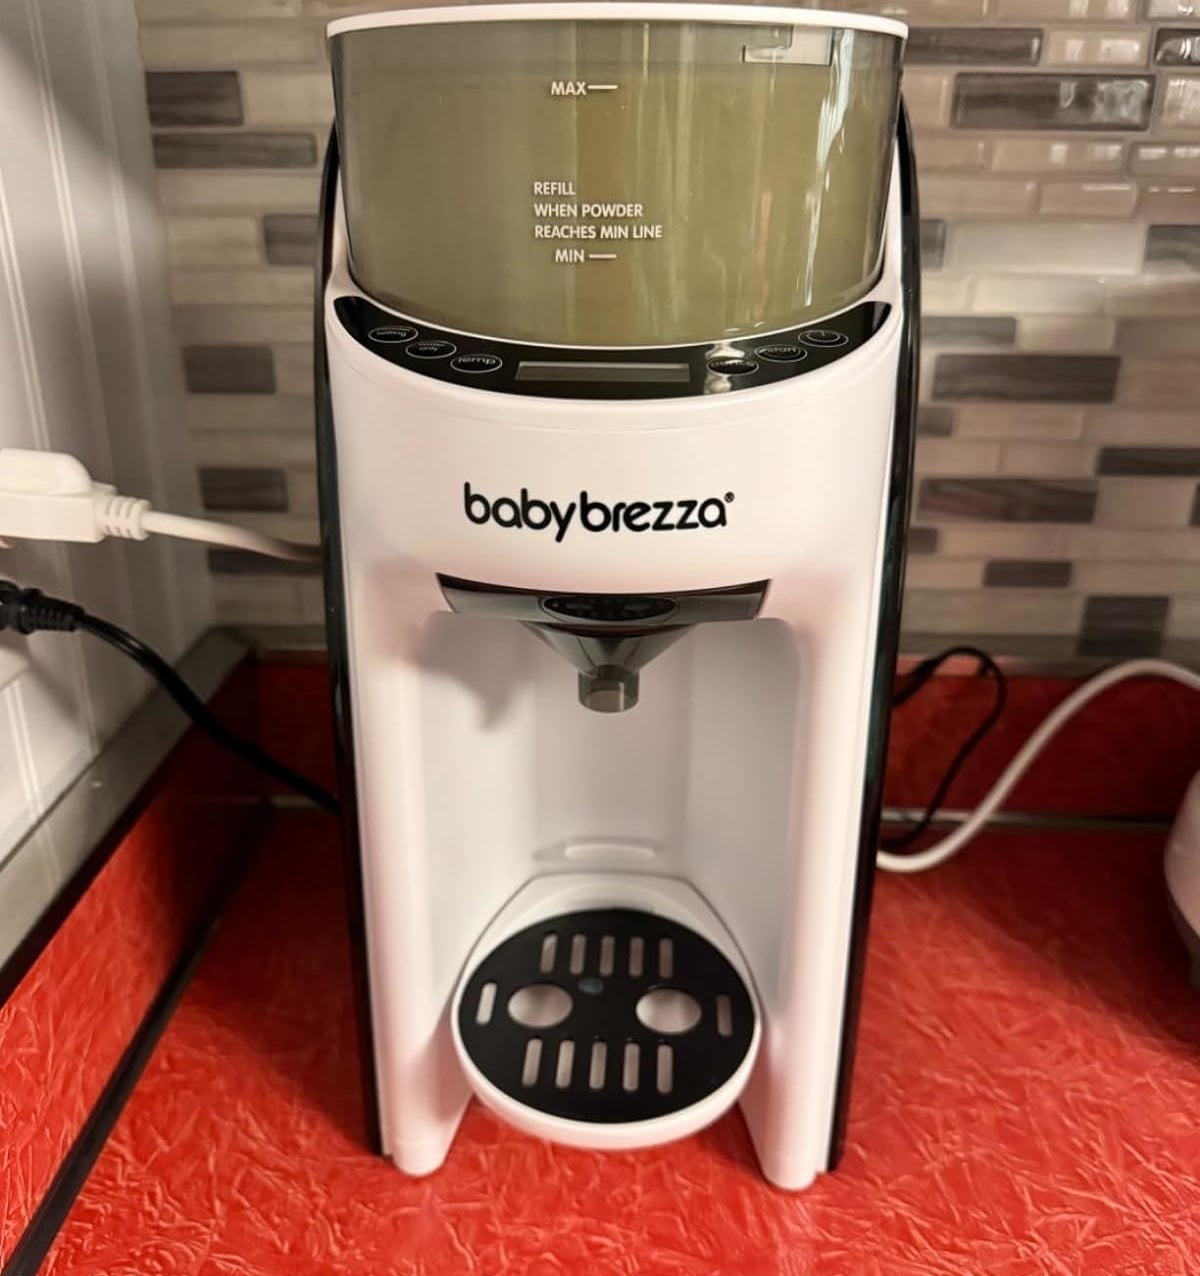 A Baby Brezza appliance on a counter, used for making baby formula